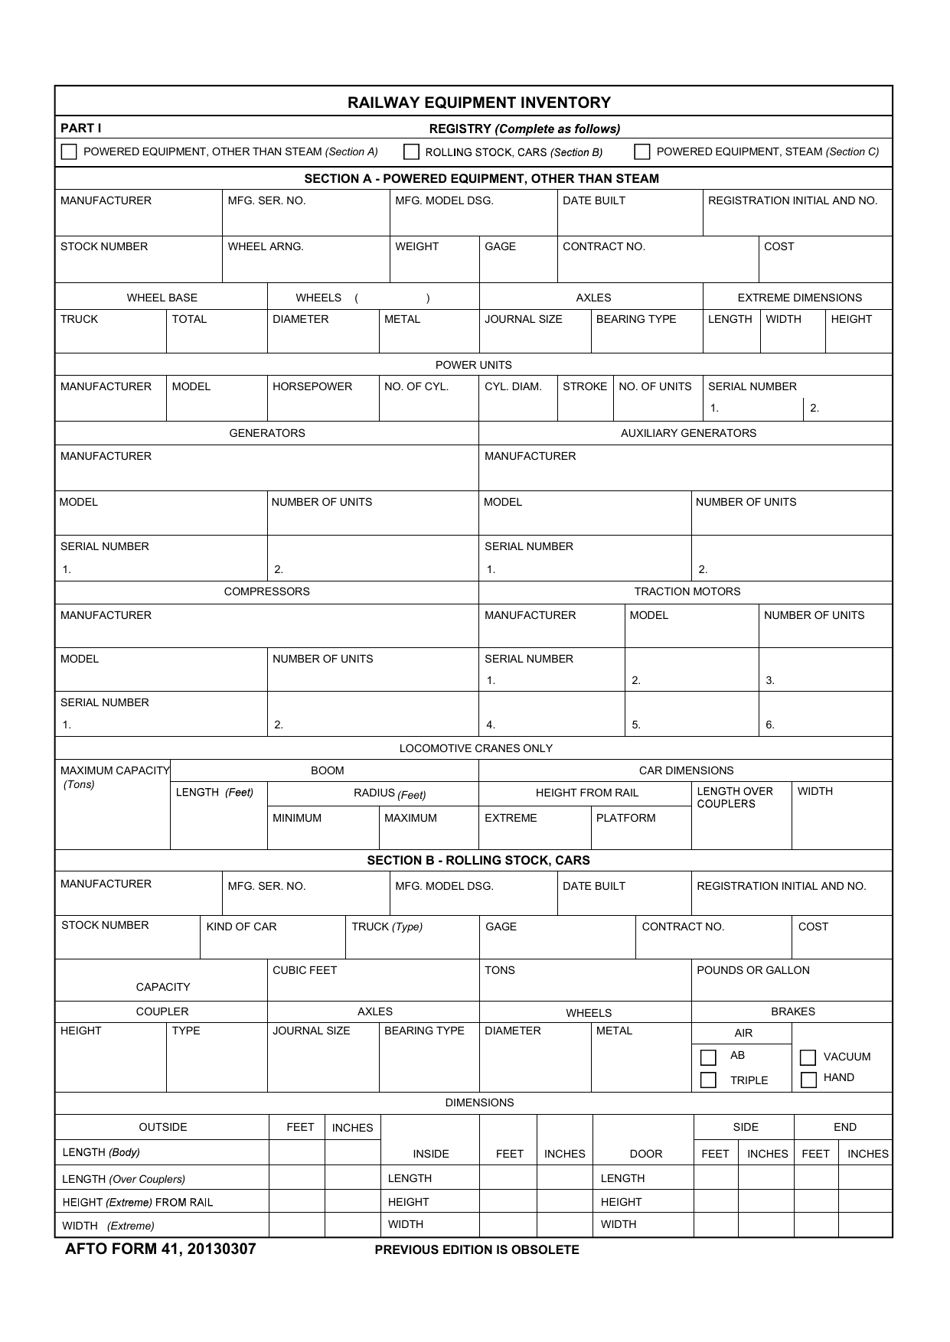 AFTO Form 41 Railway Equipment Inventory, Page 1